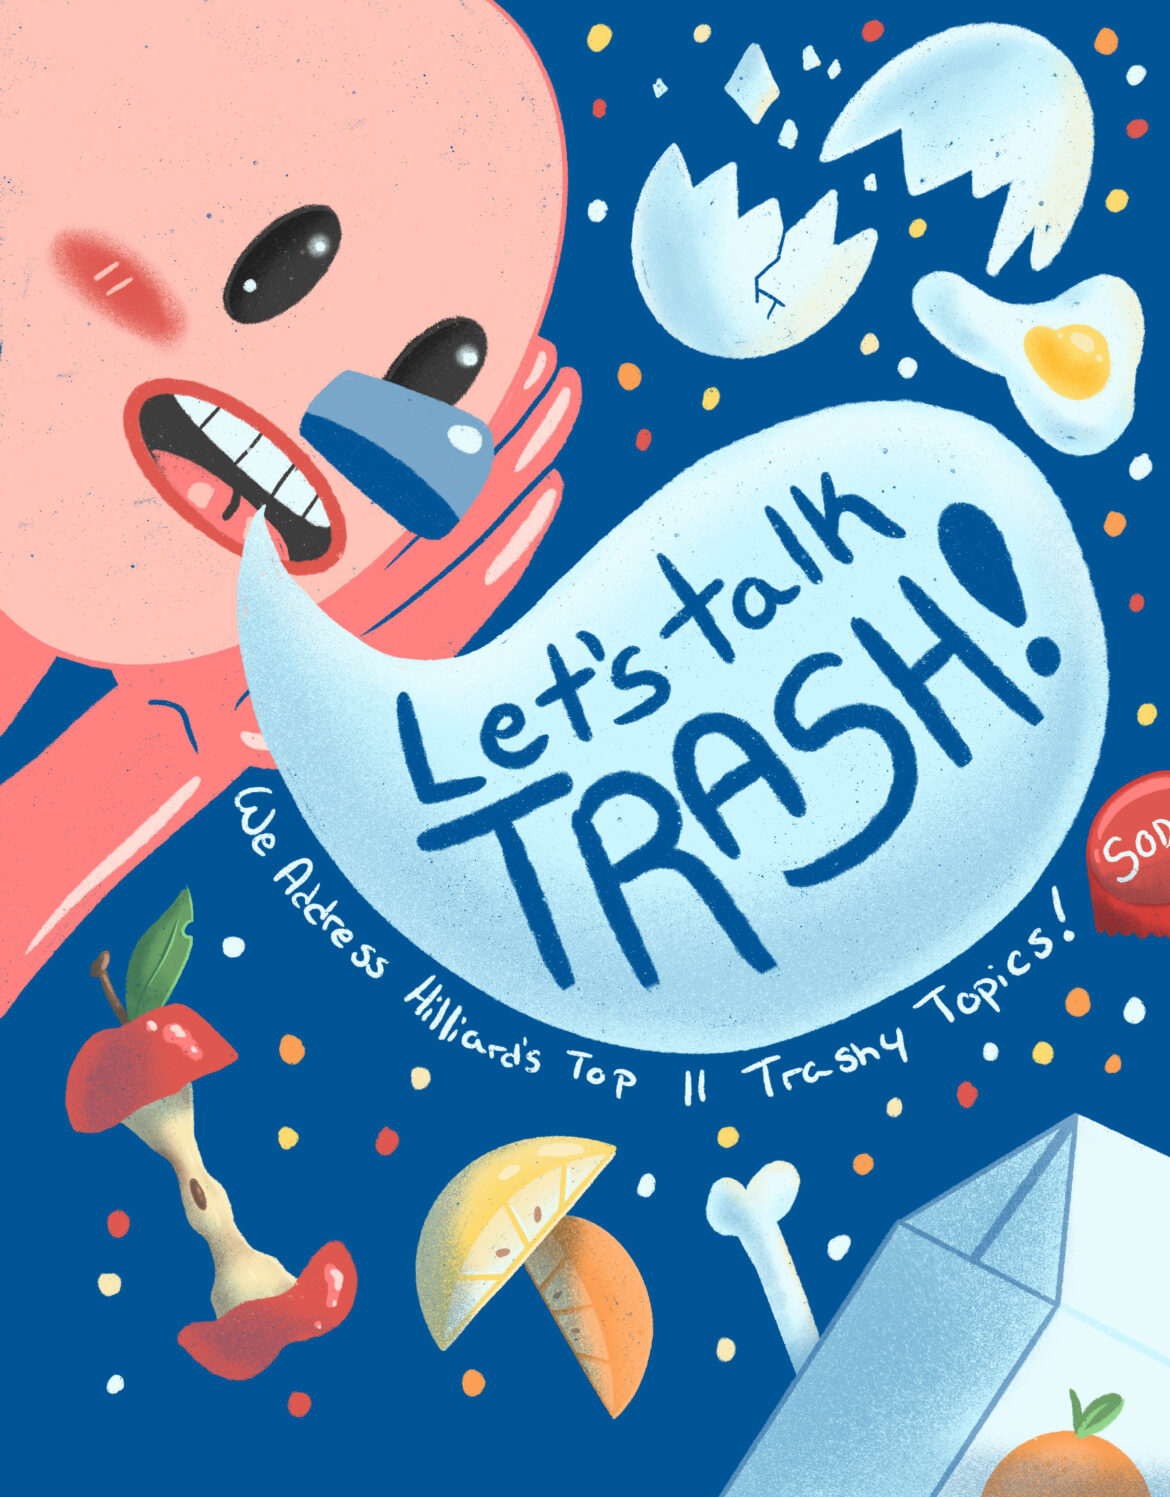 Illustration of someone shouting 'let's talk about trash', surrounded by various trash